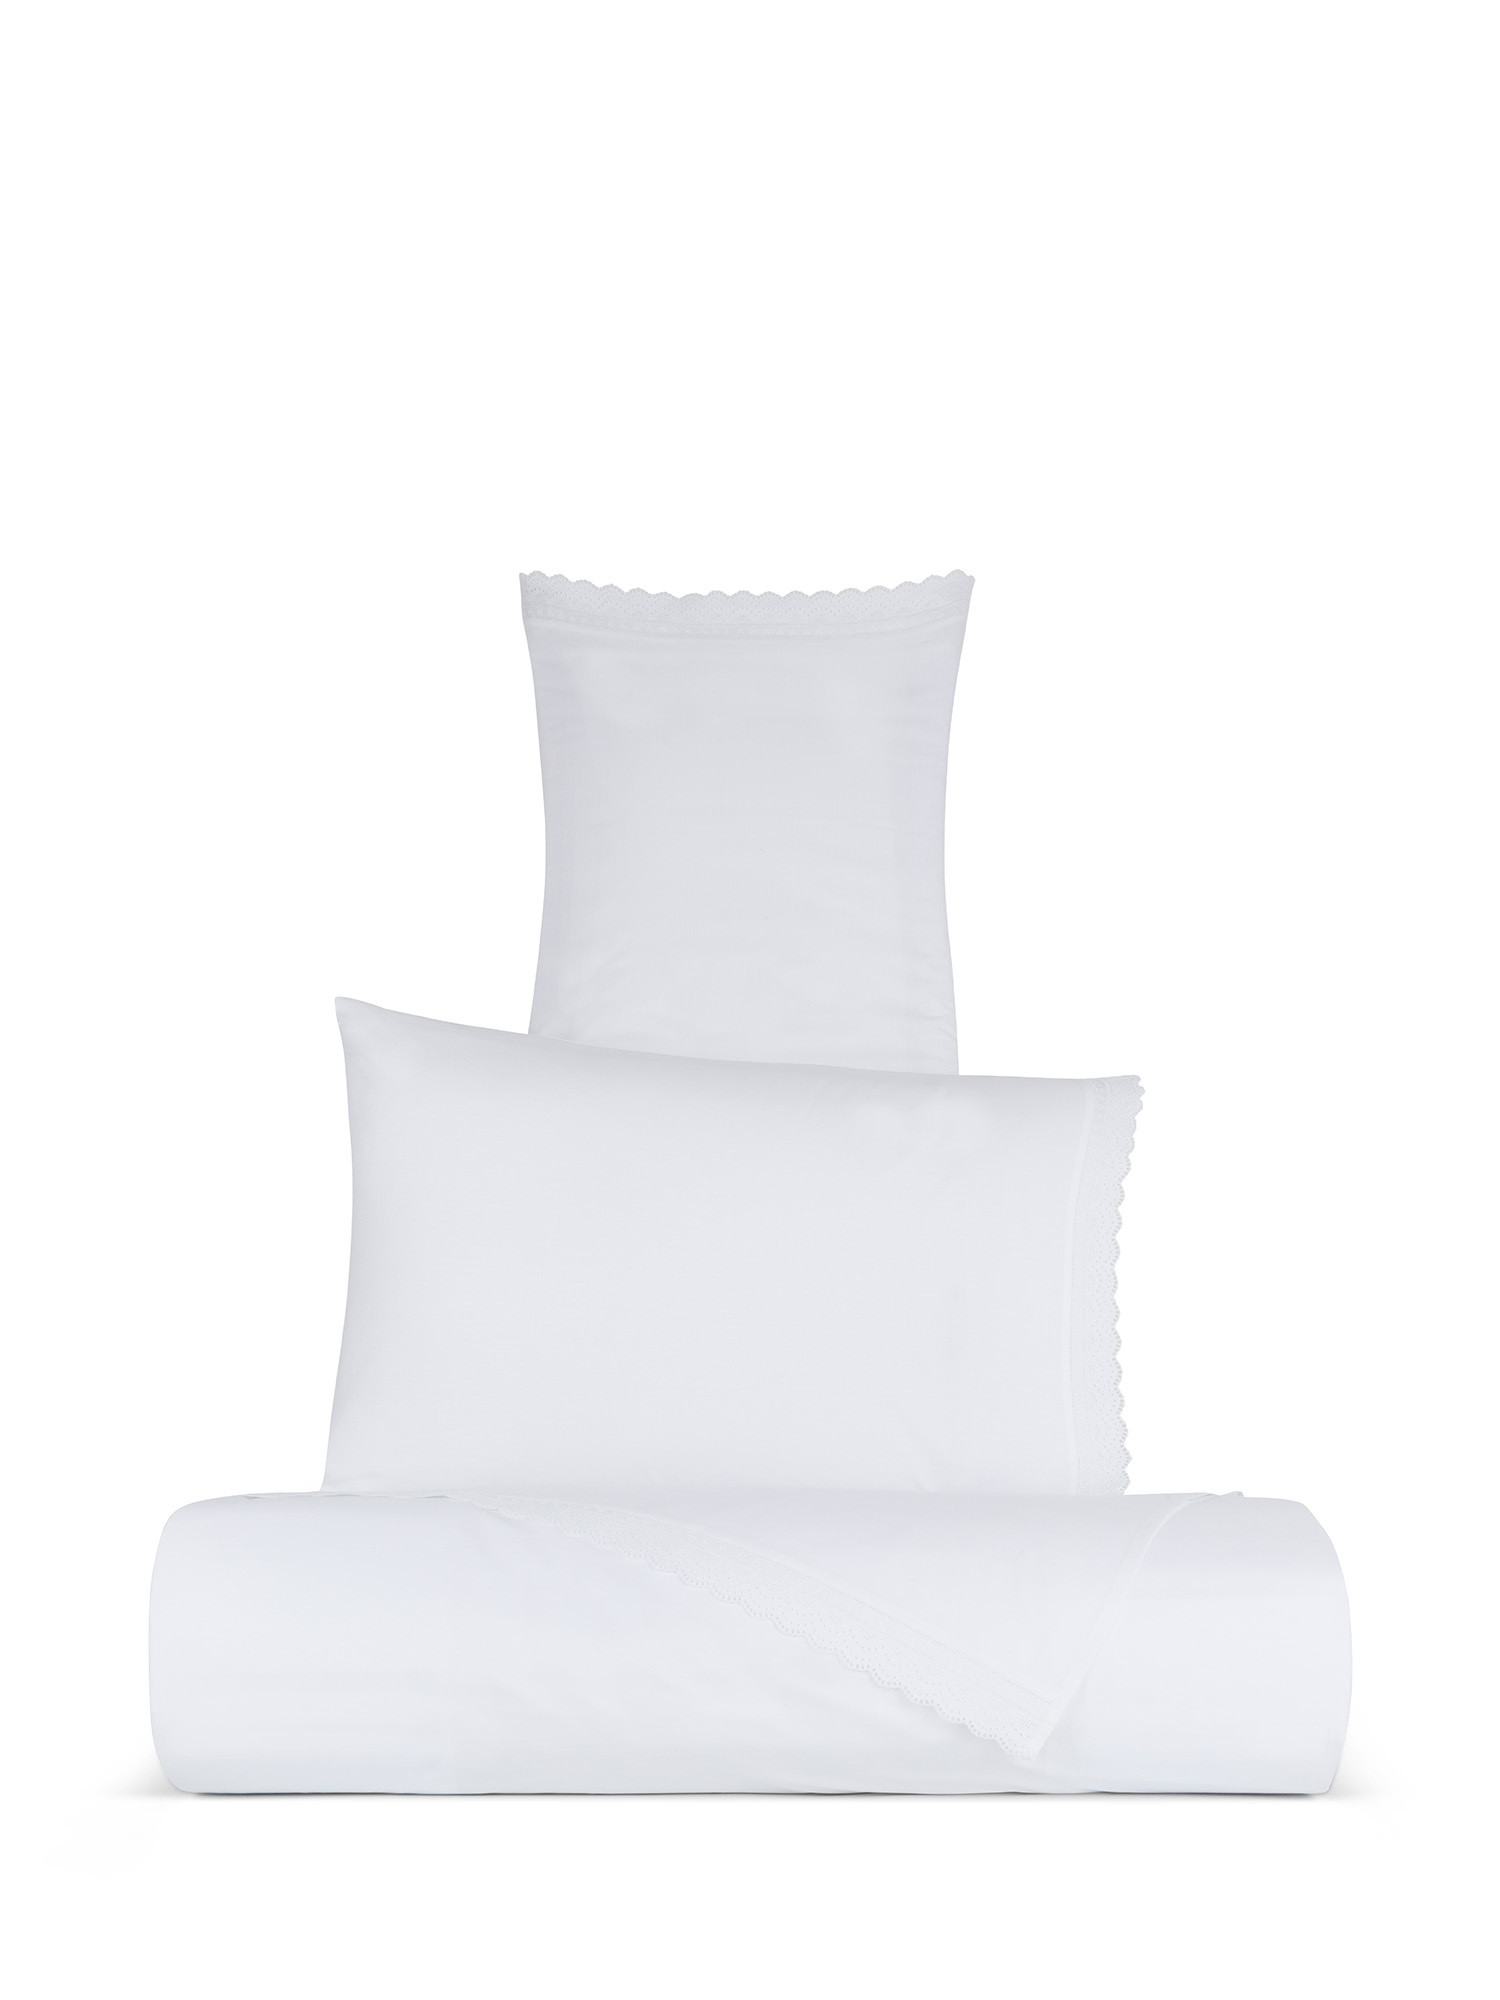 Cotton percale sheet set with broderie anglaise embroidery, White, large image number 0